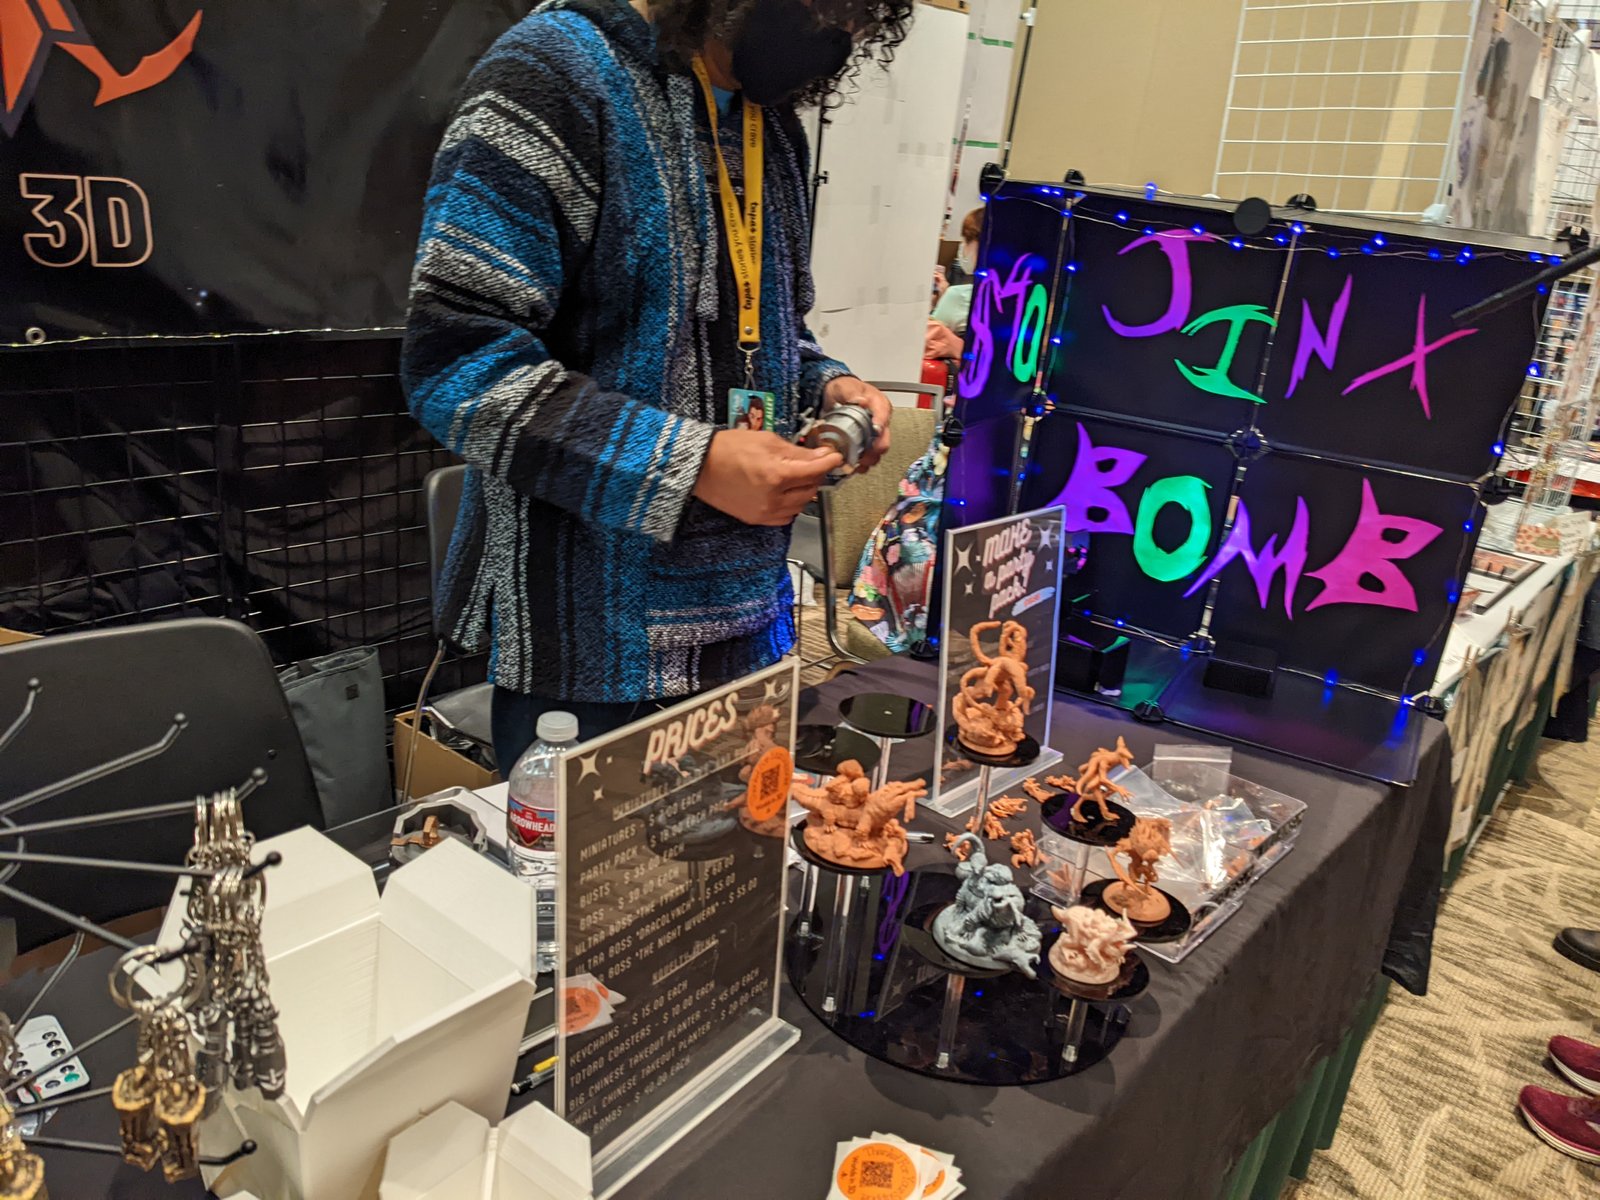 Image of a table set up at convention